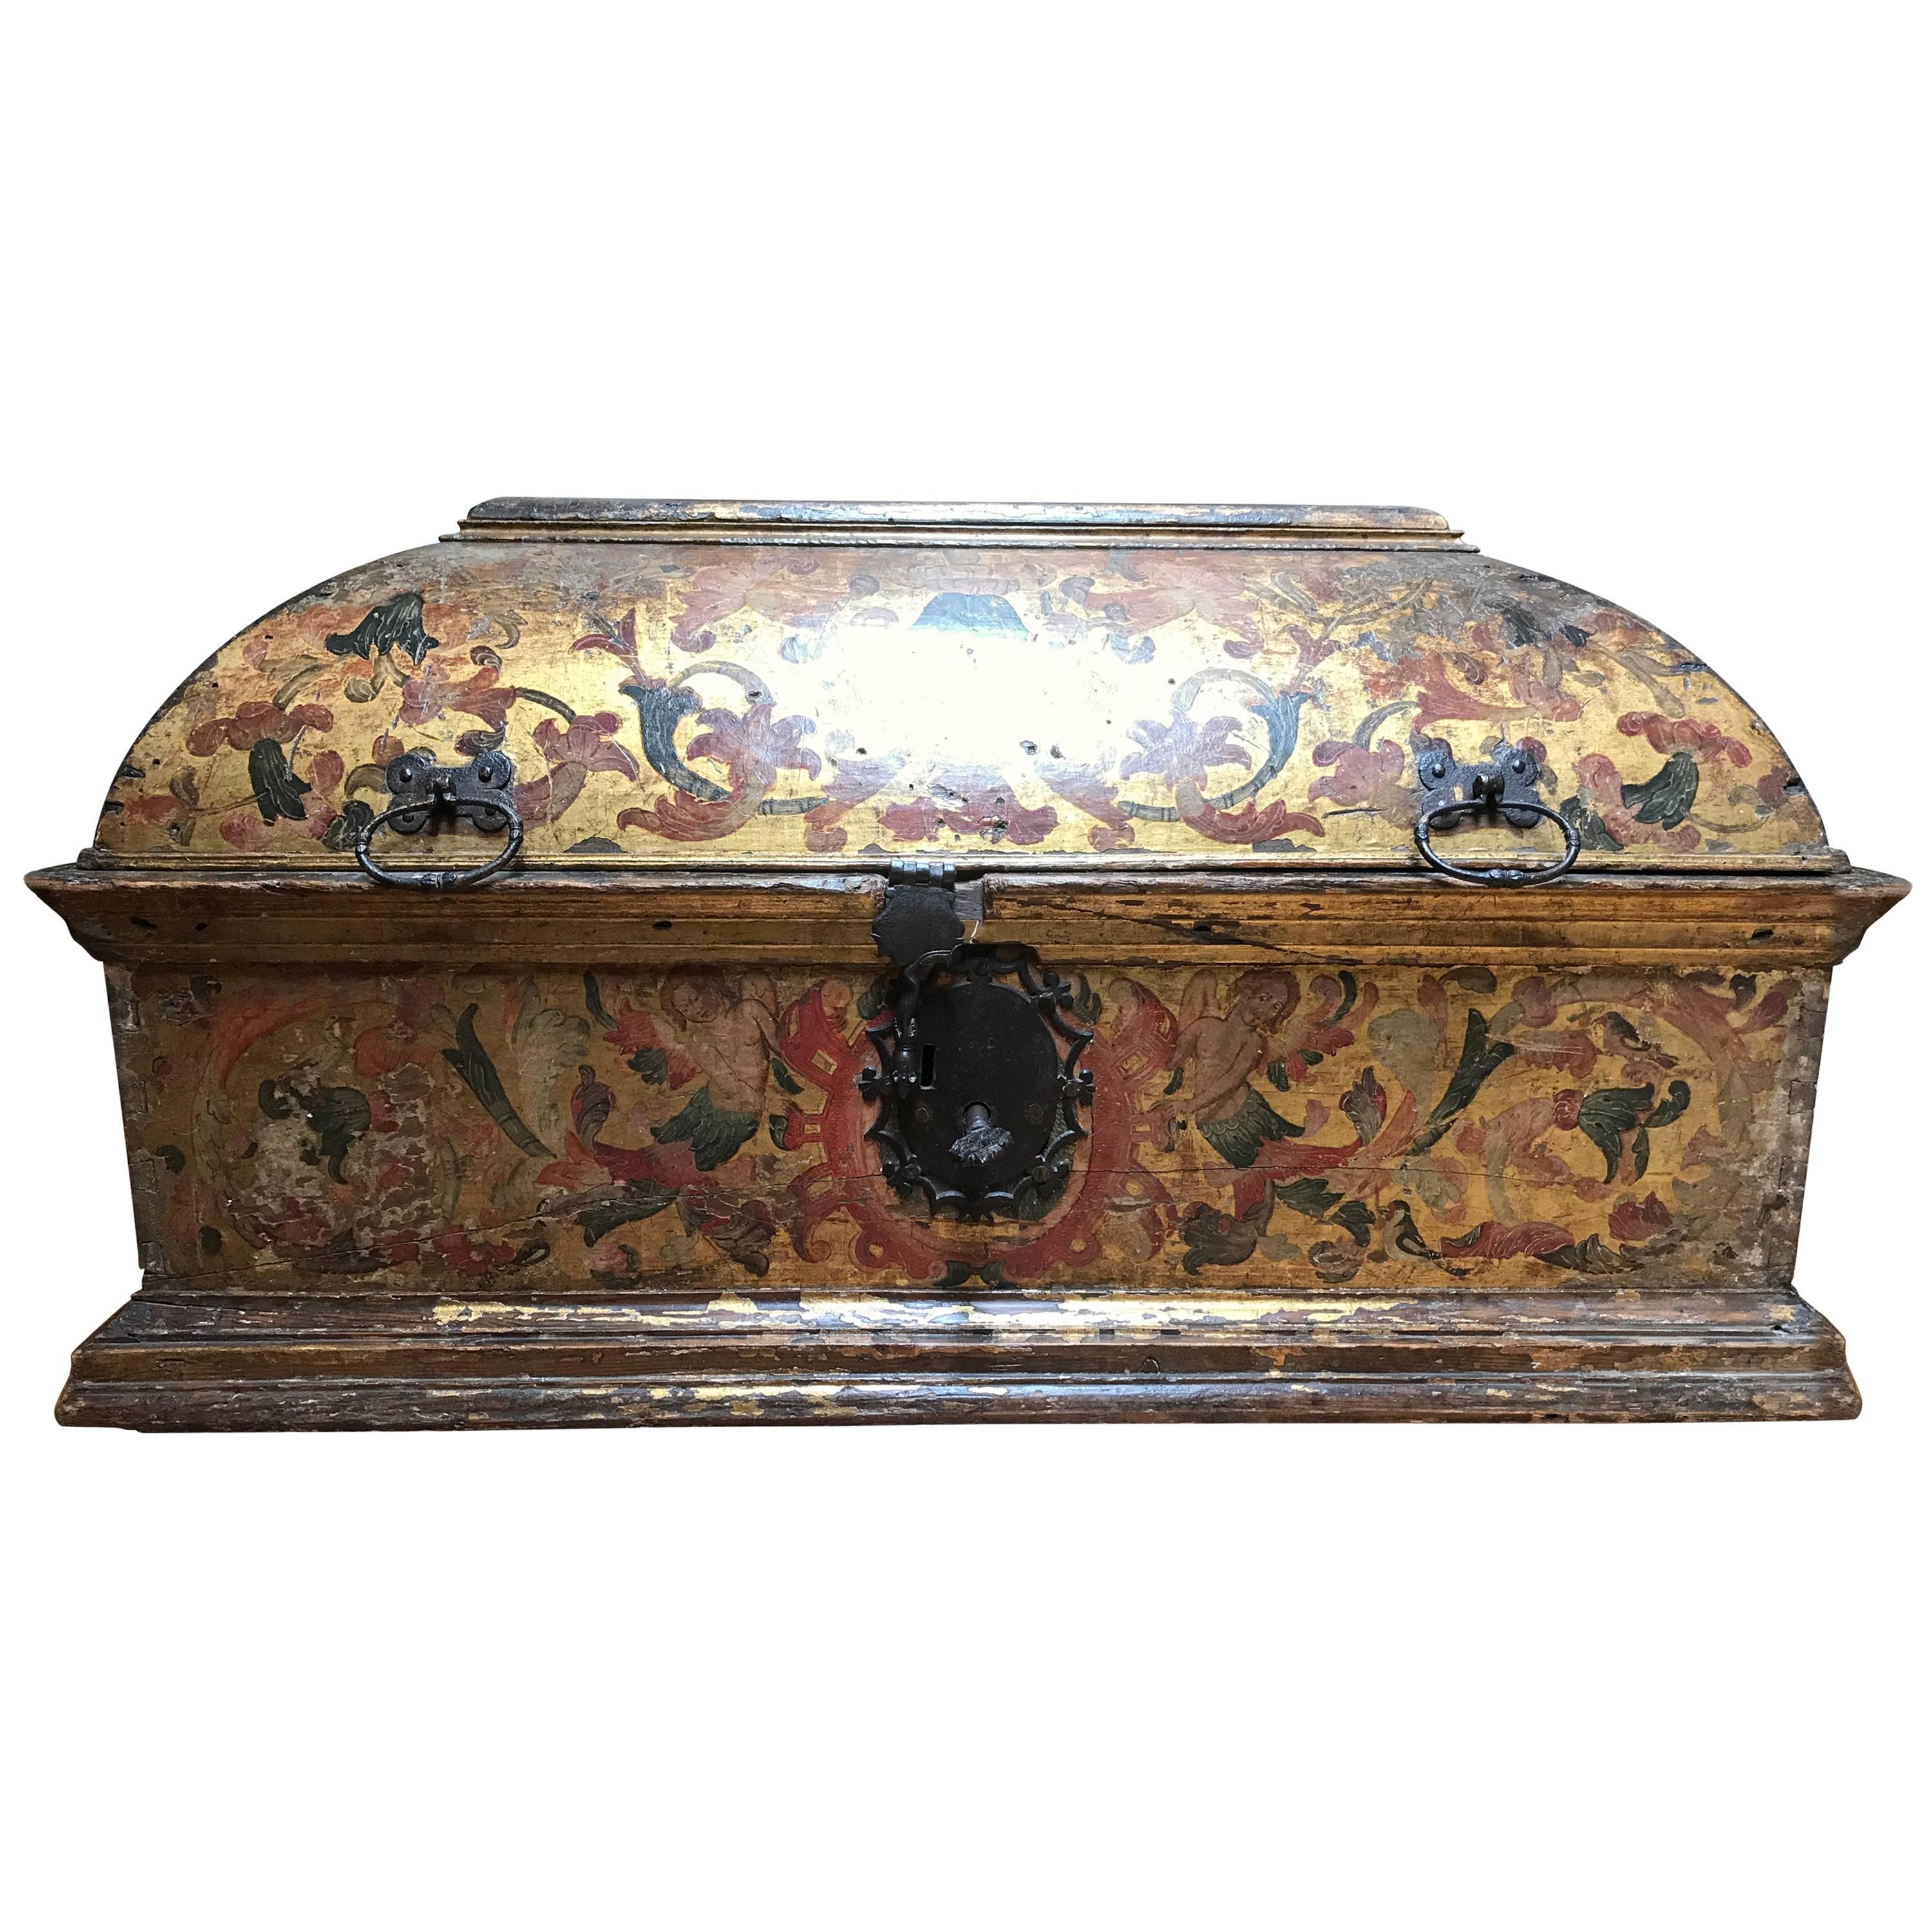 Extremely Rare Cassone late 15th Century Torino Family Savoye 1480-1490 dated For Sale